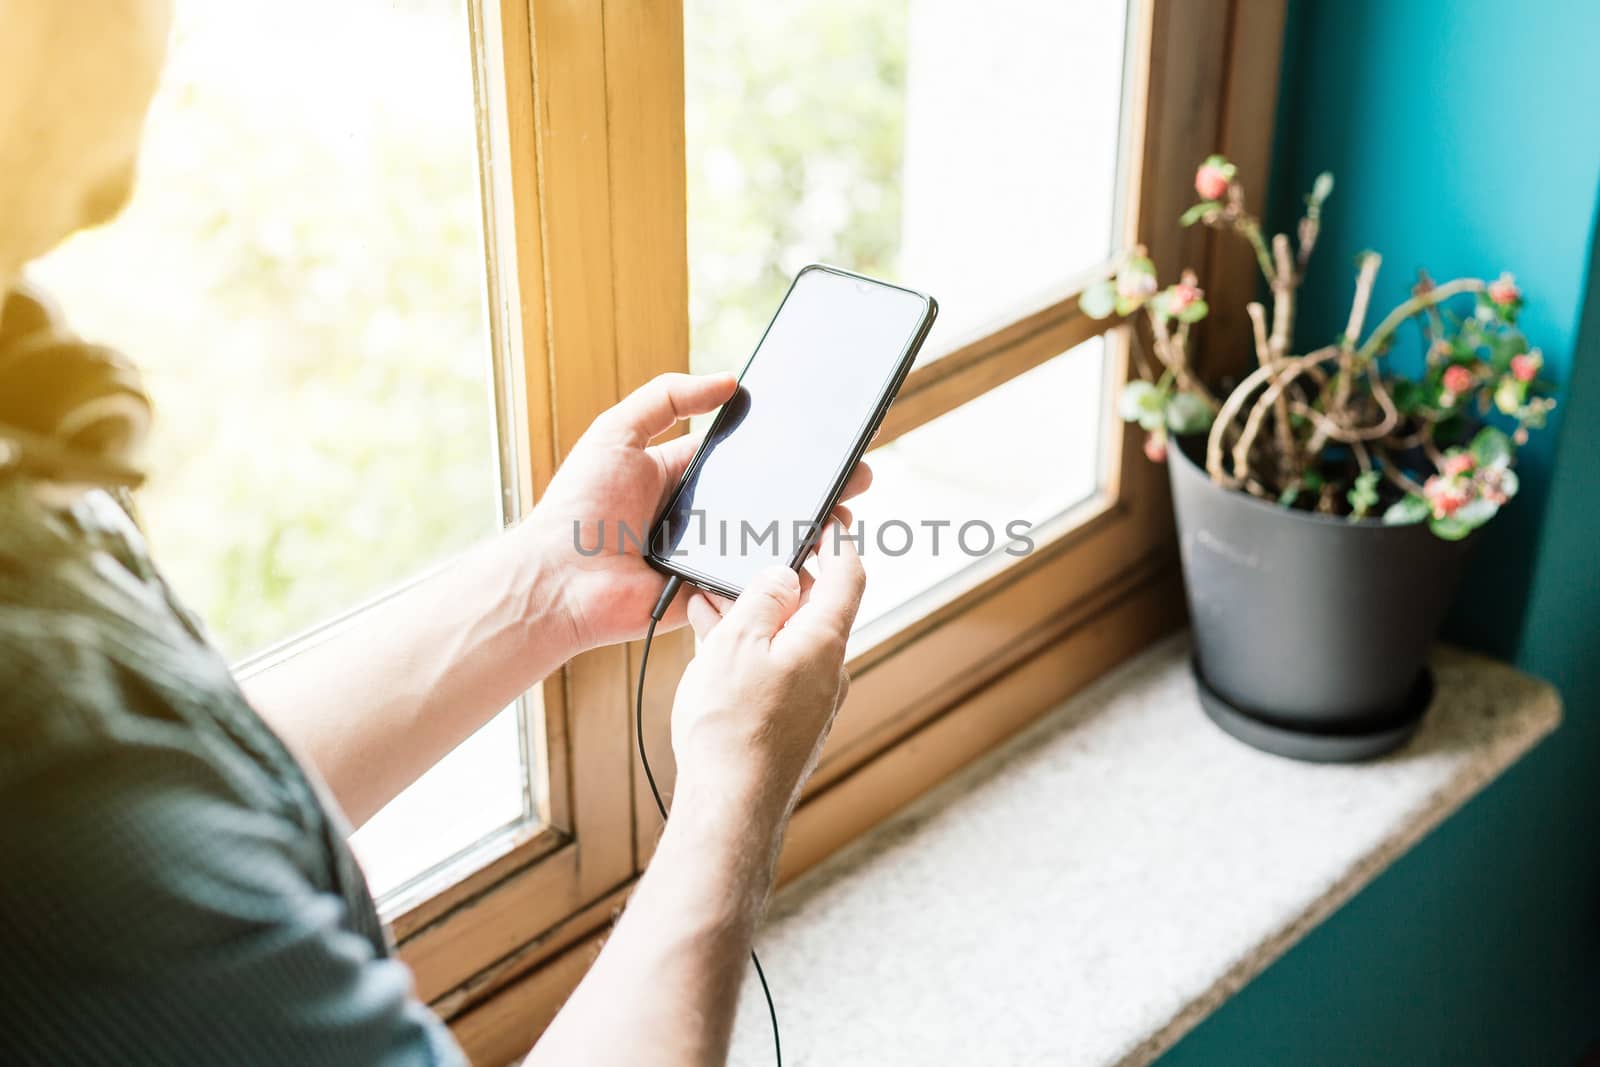 Man holding mobile in his hands next to a window with headphones attached and the sun is shining